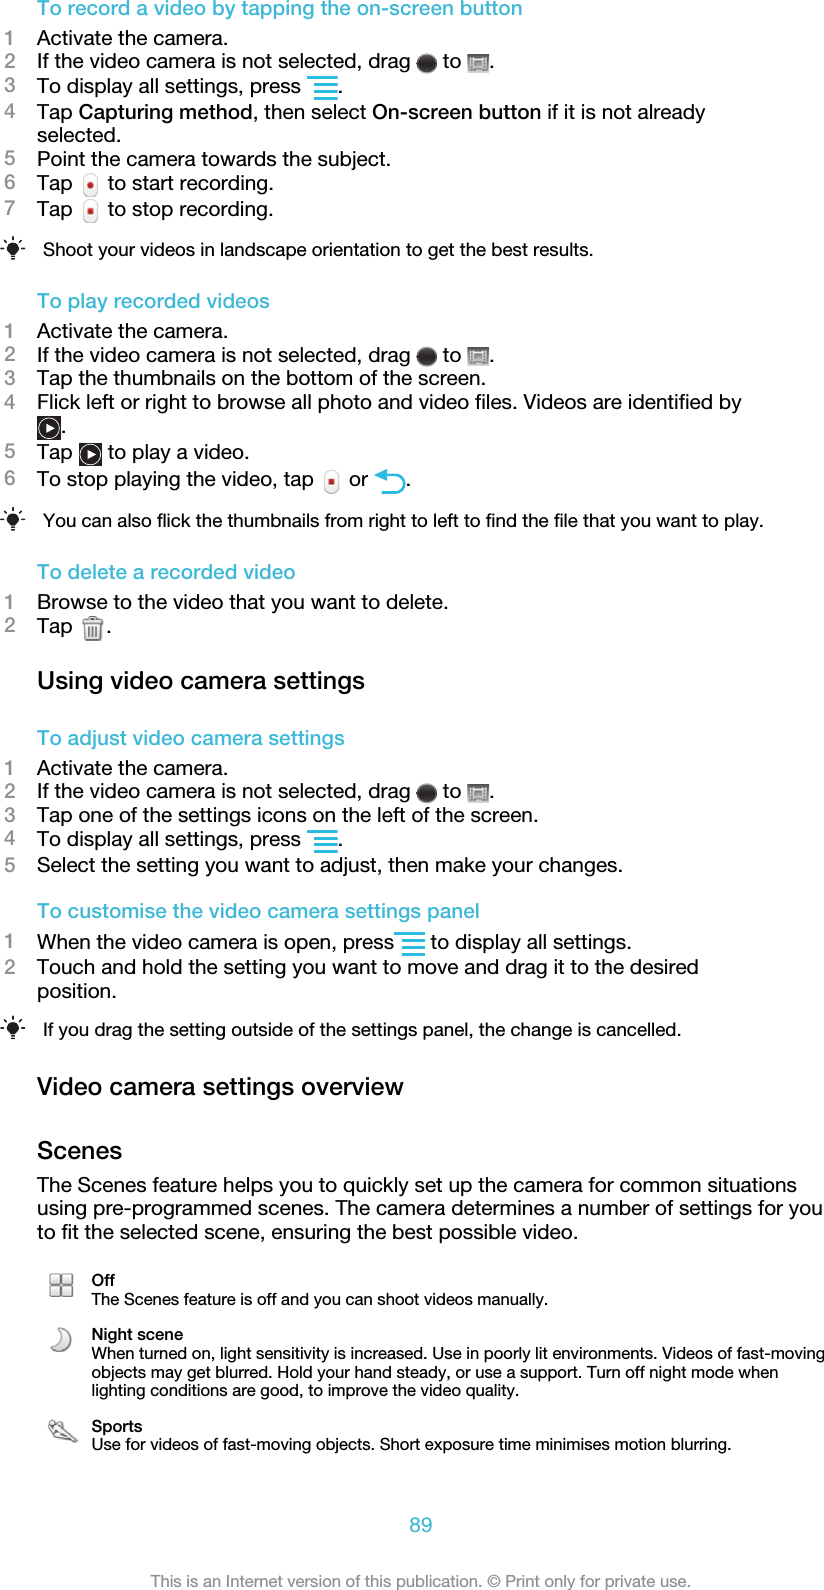 To record a video by tapping the on-screen button1Activate the camera.2If the video camera is not selected, drag   to  .3To display all settings, press  .4Tap Capturing method, then select On-screen button if it is not alreadyselected.5Point the camera towards the subject.6Tap   to start recording.7Tap   to stop recording.Shoot your videos in landscape orientation to get the best results.To play recorded videos1Activate the camera.2If the video camera is not selected, drag   to  .3Tap the thumbnails on the bottom of the screen.4Flick left or right to browse all photo and video files. Videos are identified by.5Tap   to play a video.6To stop playing the video, tap   or  .You can also flick the thumbnails from right to left to find the file that you want to play.To delete a recorded video1Browse to the video that you want to delete.2Tap  .Using video camera settingsTo adjust video camera settings1Activate the camera.2If the video camera is not selected, drag   to  .3Tap one of the settings icons on the left of the screen.4To display all settings, press  .5Select the setting you want to adjust, then make your changes.To customise the video camera settings panel1When the video camera is open, press  to display all settings.2Touch and hold the setting you want to move and drag it to the desiredposition.If you drag the setting outside of the settings panel, the change is cancelled.Video camera settings overviewScenesThe Scenes feature helps you to quickly set up the camera for common situationsusing pre-programmed scenes. The camera determines a number of settings for youto fit the selected scene, ensuring the best possible video.OffThe Scenes feature is off and you can shoot videos manually.Night sceneWhen turned on, light sensitivity is increased. Use in poorly lit environments. Videos of fast-movingobjects may get blurred. Hold your hand steady, or use a support. Turn off night mode whenlighting conditions are good, to improve the video quality.SportsUse for videos of fast-moving objects. Short exposure time minimises motion blurring.89This is an Internet version of this publication. © Print only for private use.